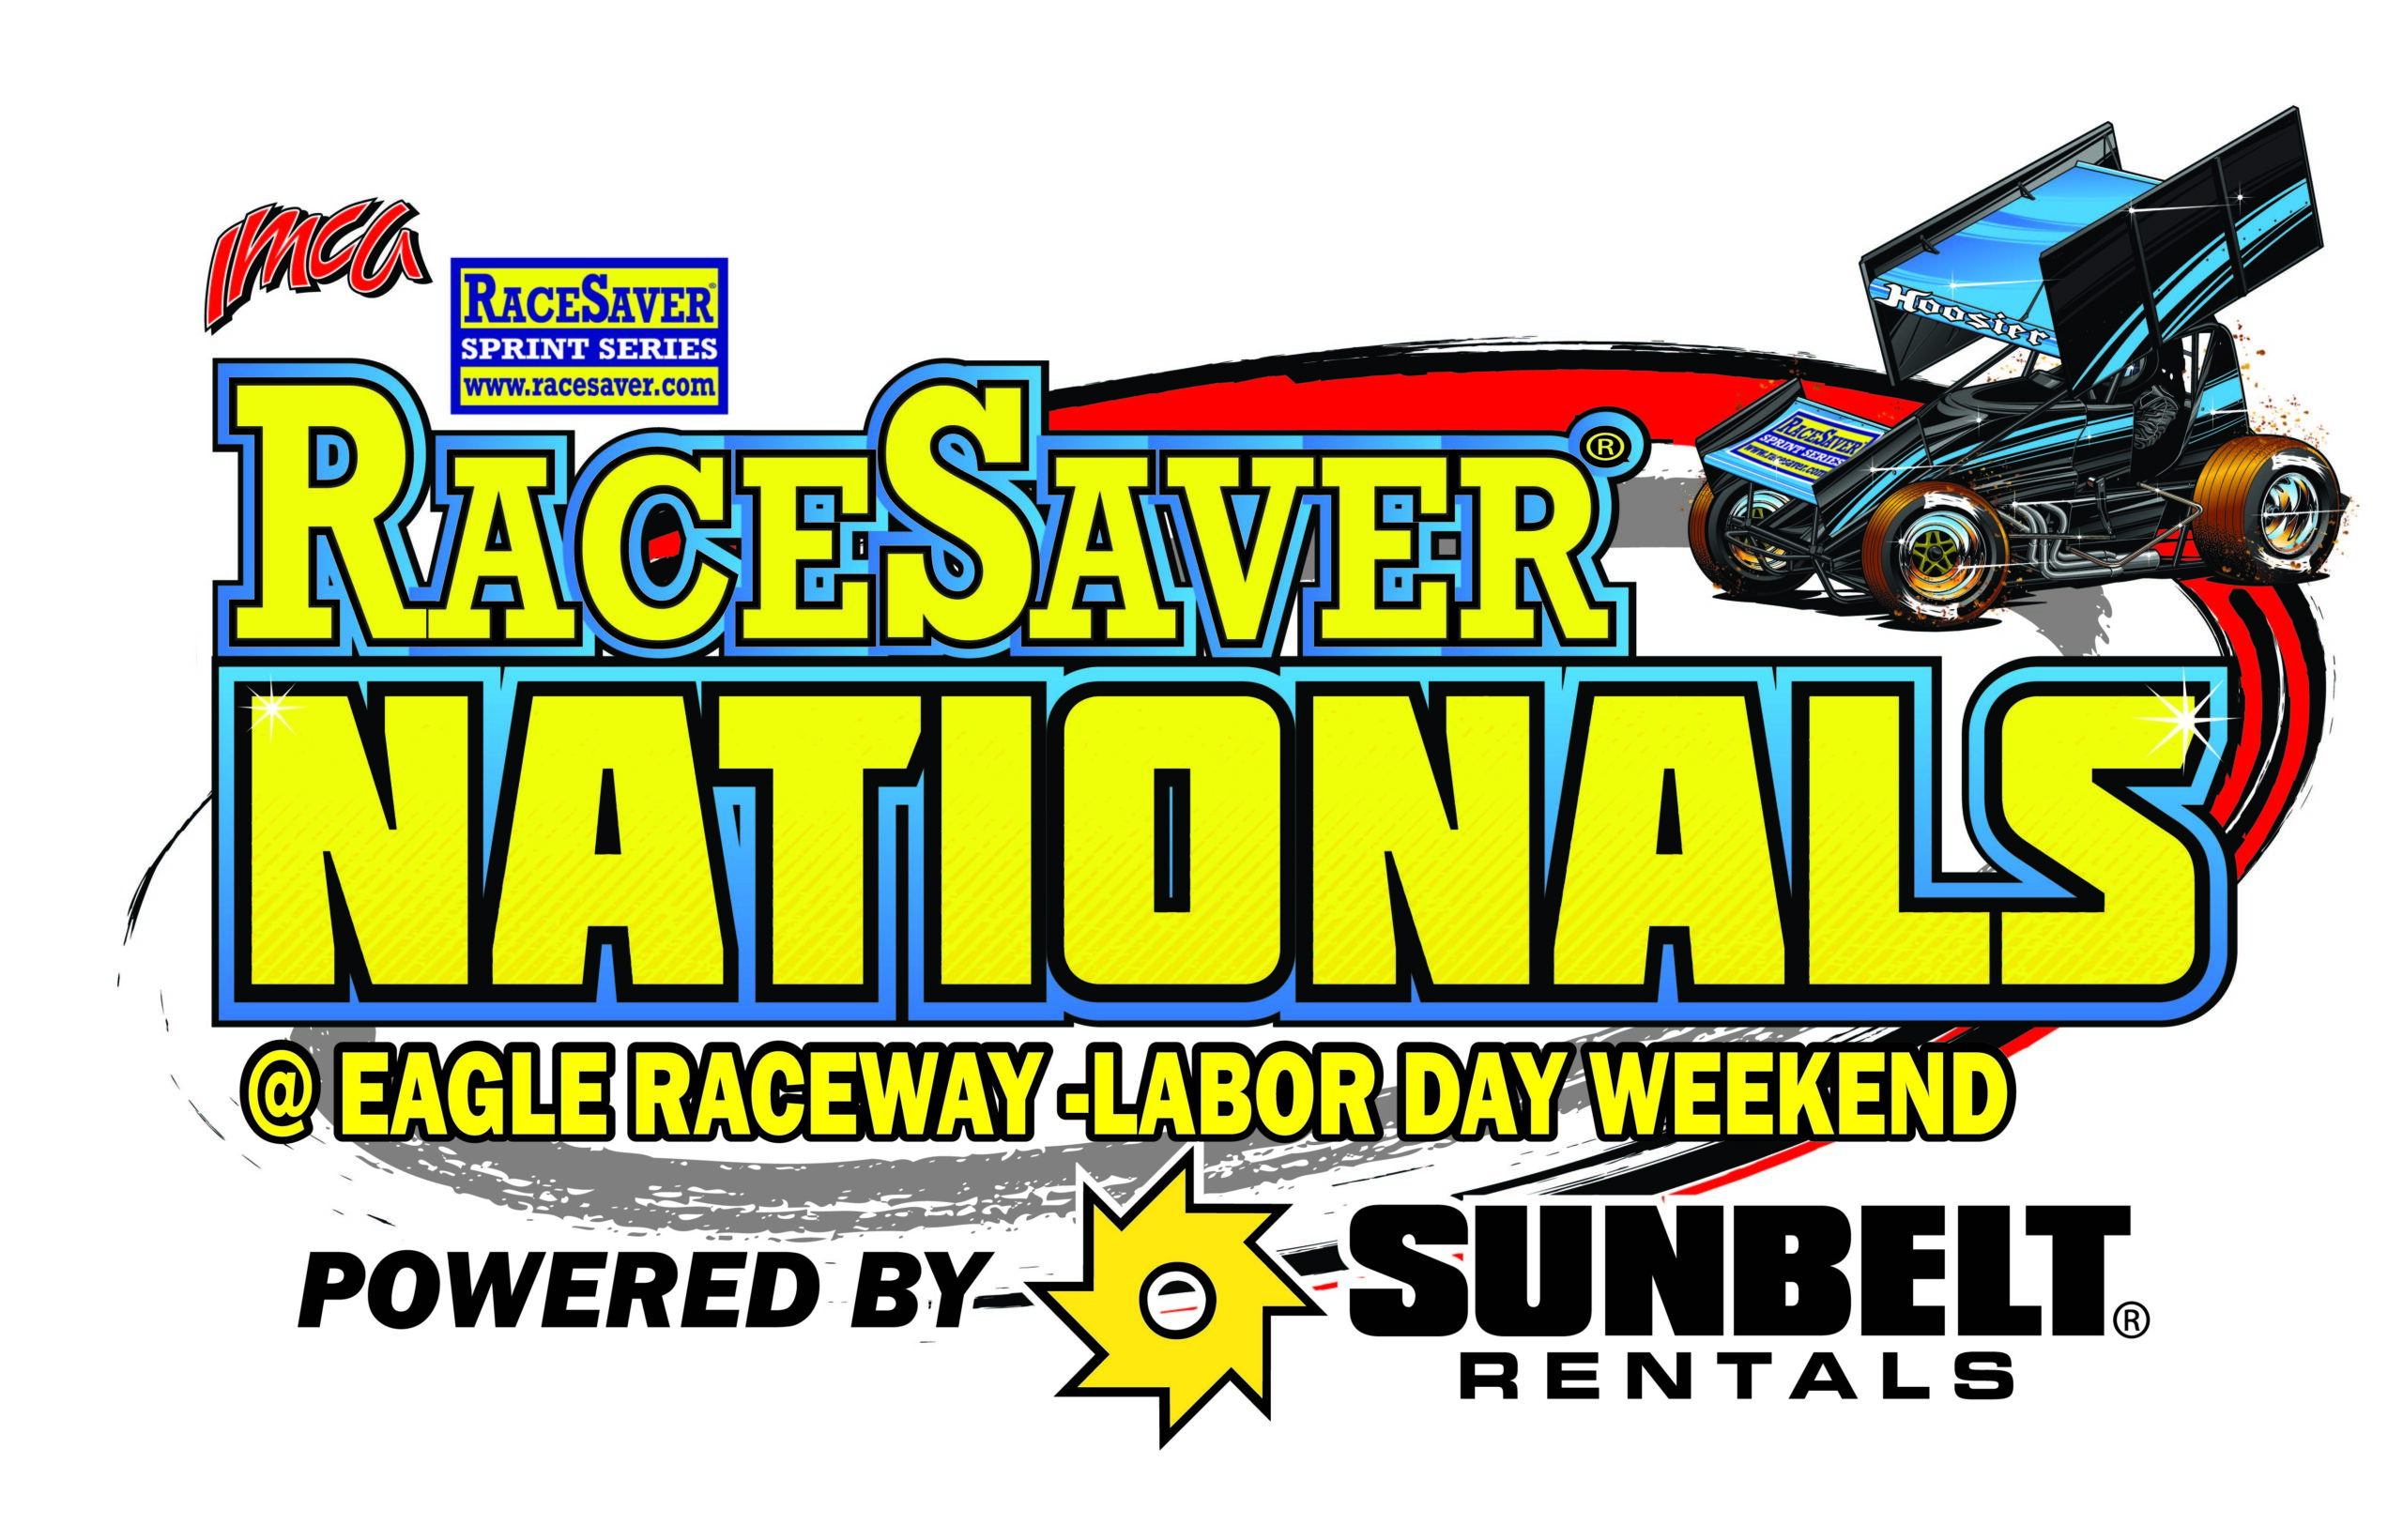 3 IMCA Sanctioned race rule is waived for 2022 RaceSaver Nationals